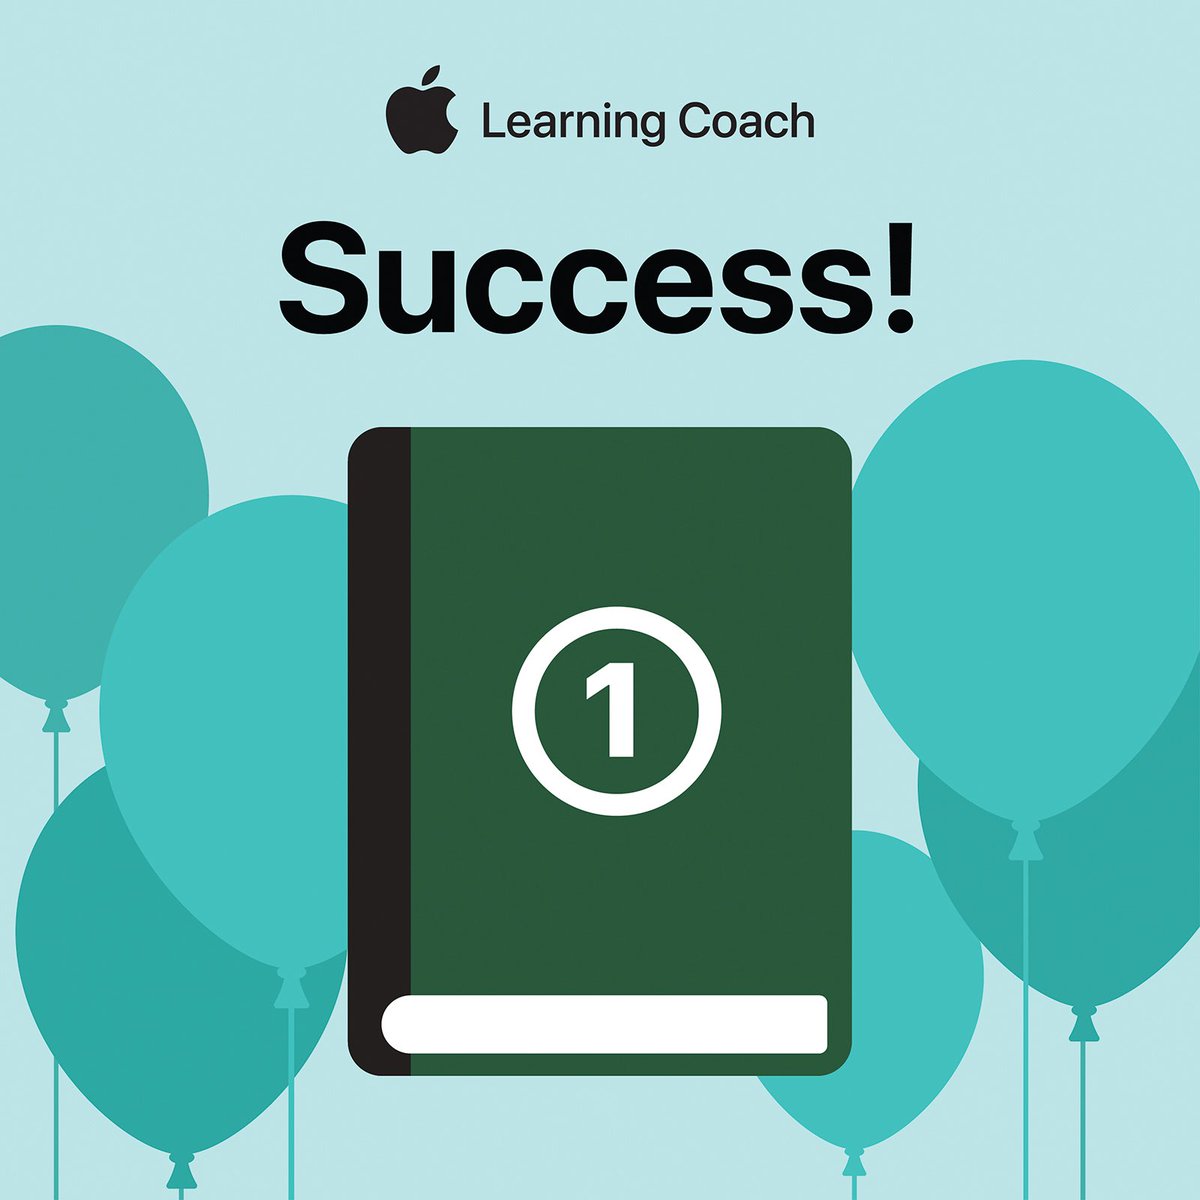 Just completed Unit 1 of the Apple Learning Coach certification program. Learning so much about instructional coaching and meeting learners where they are! #InnovationVanguard #BPSD #BPSDInnovators #OCCUE #Apple